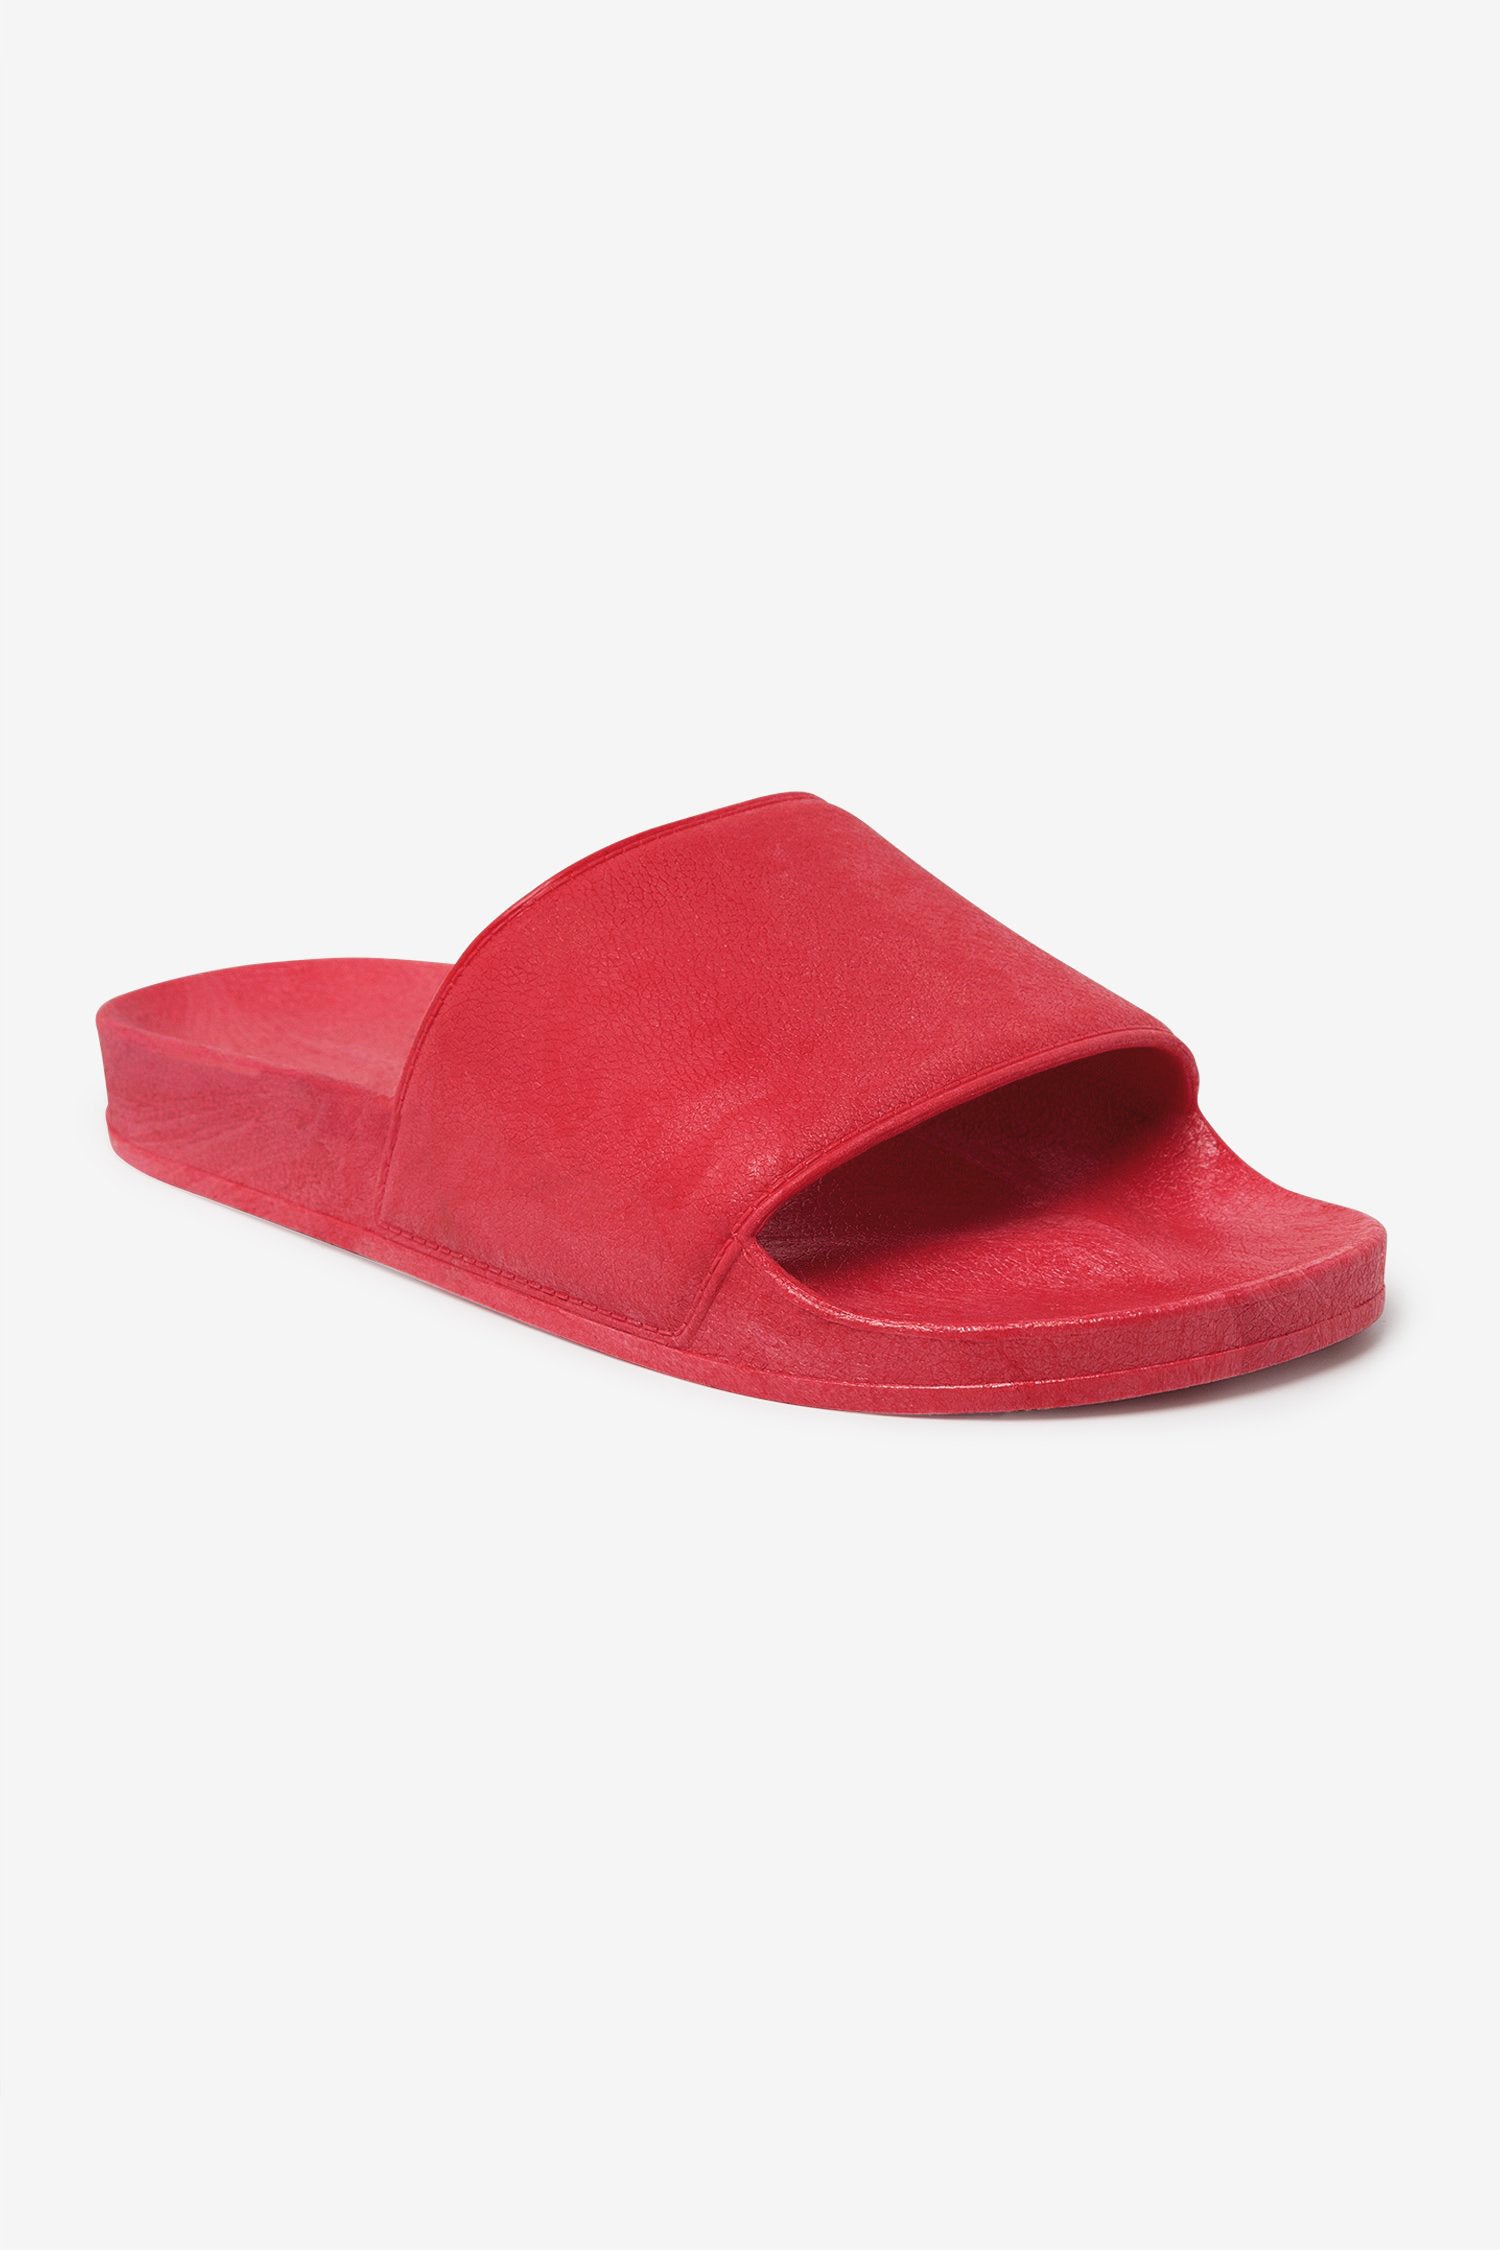 ISlides Official - Cardinals Red Americana 10 / Americana Valor Slides - Sandals - Slippers